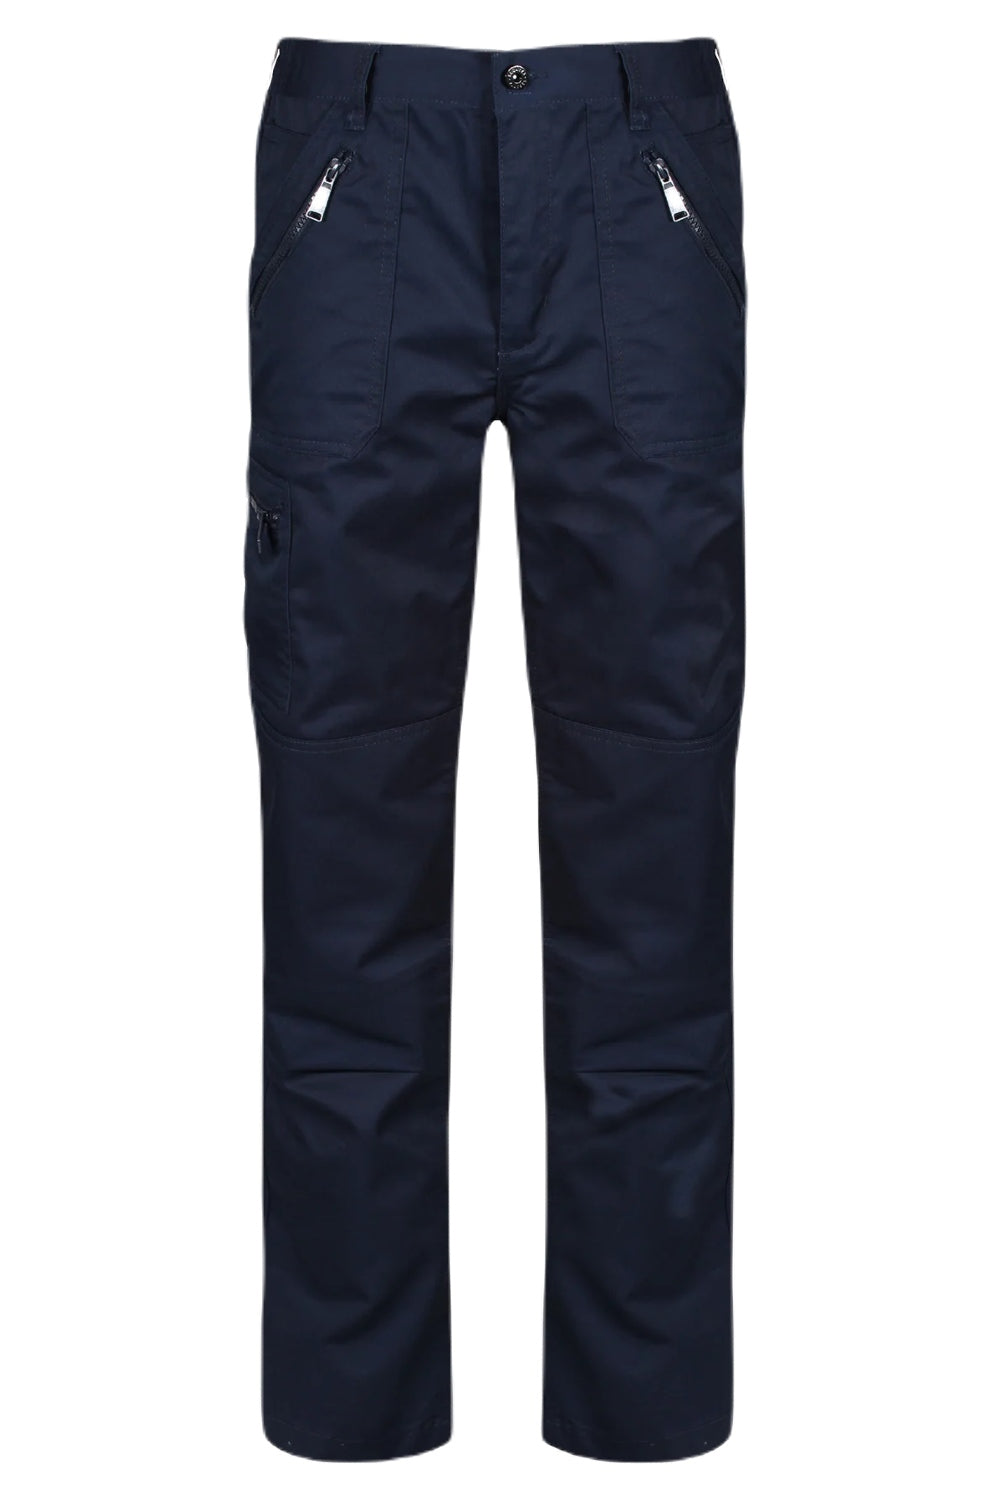 Regatta Pro Action Trousers in Navy 